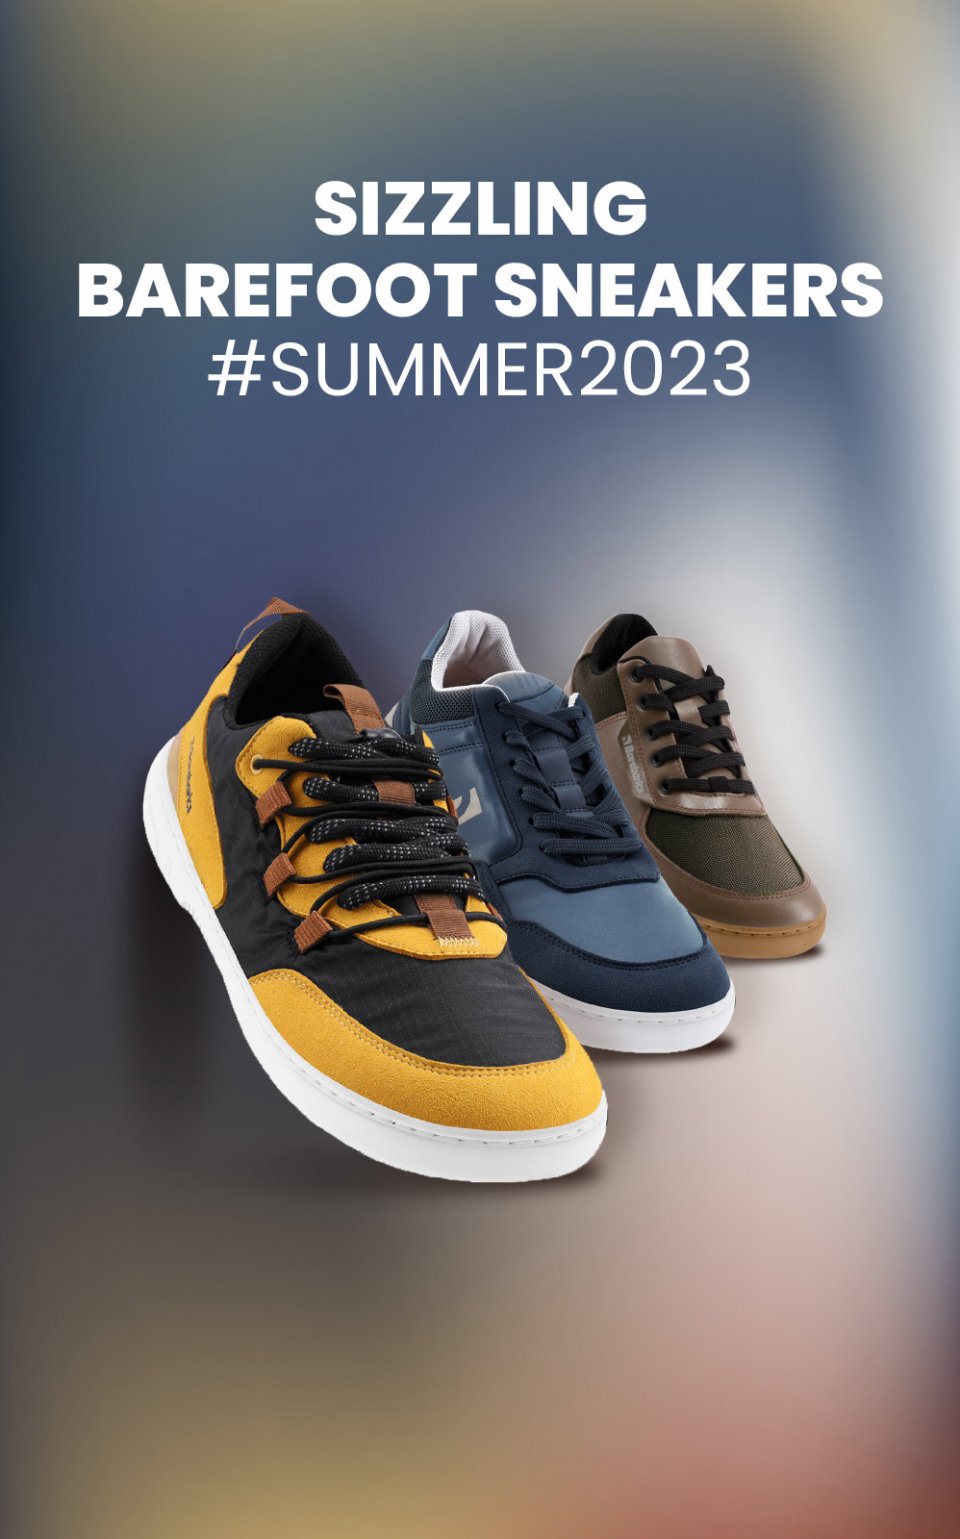 New of Barefoot Sneakers |